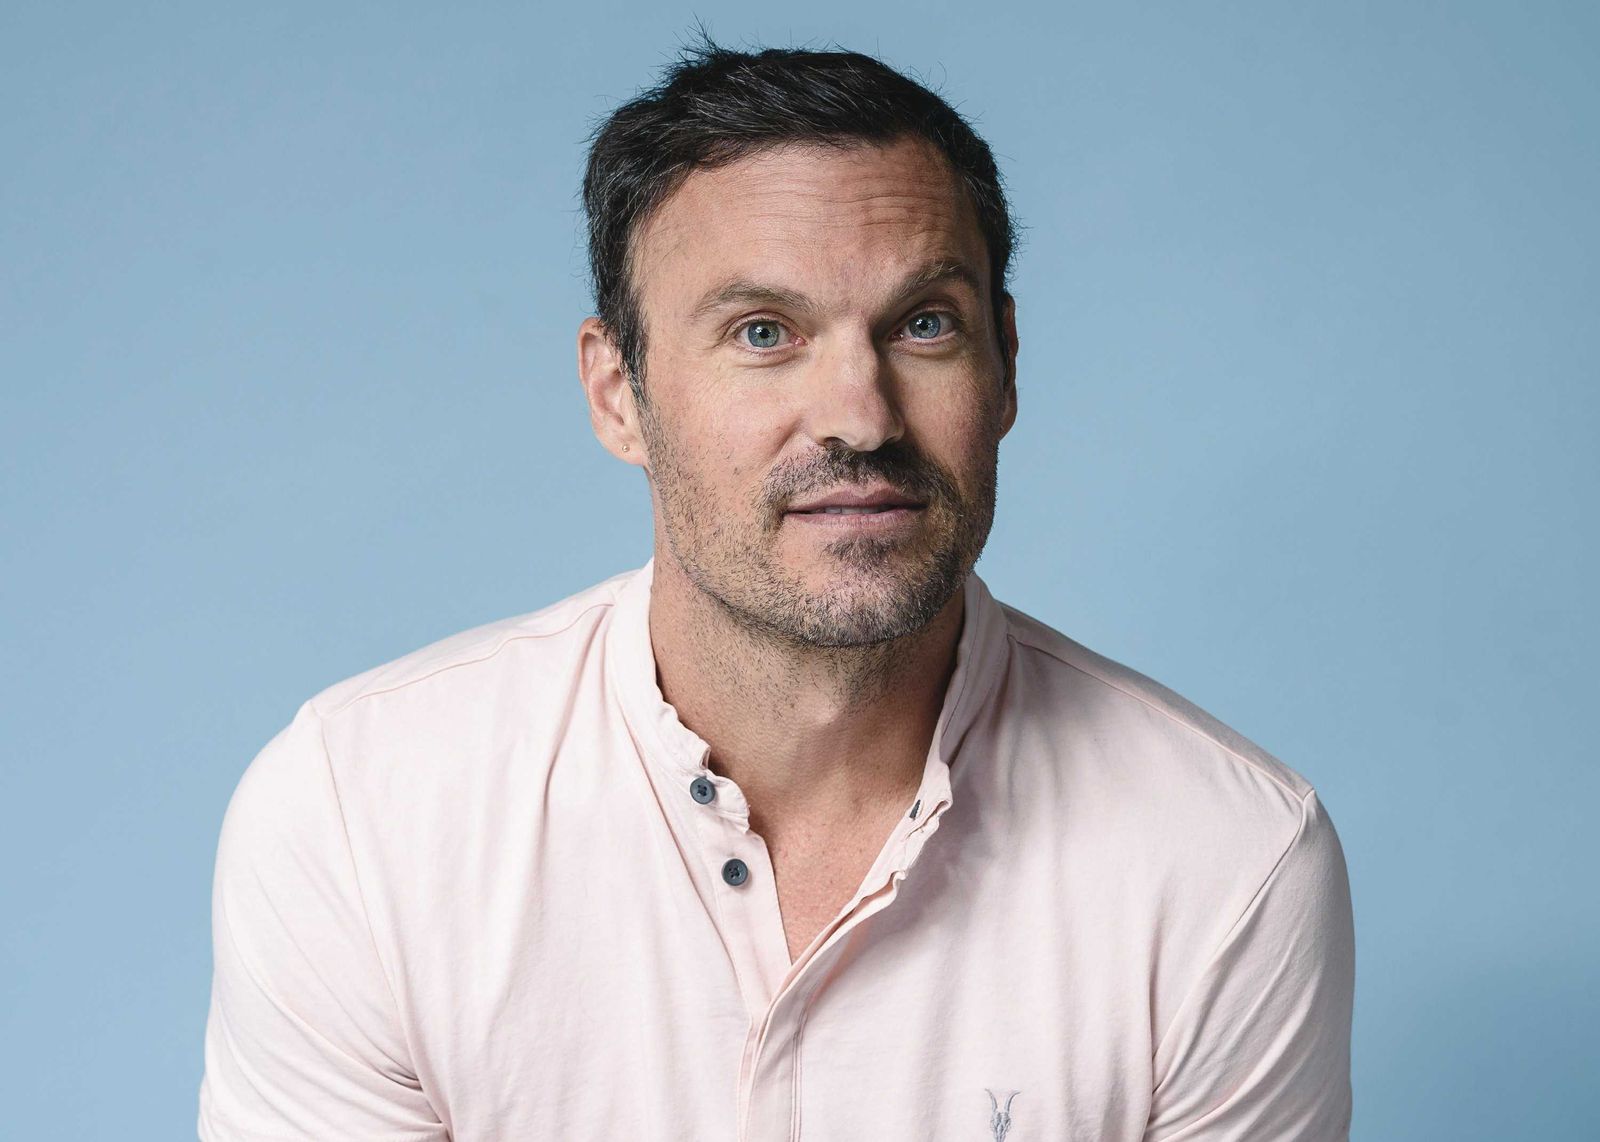 'I think that’d be amazing' - Brian Austin Green on Megan Fox having another child